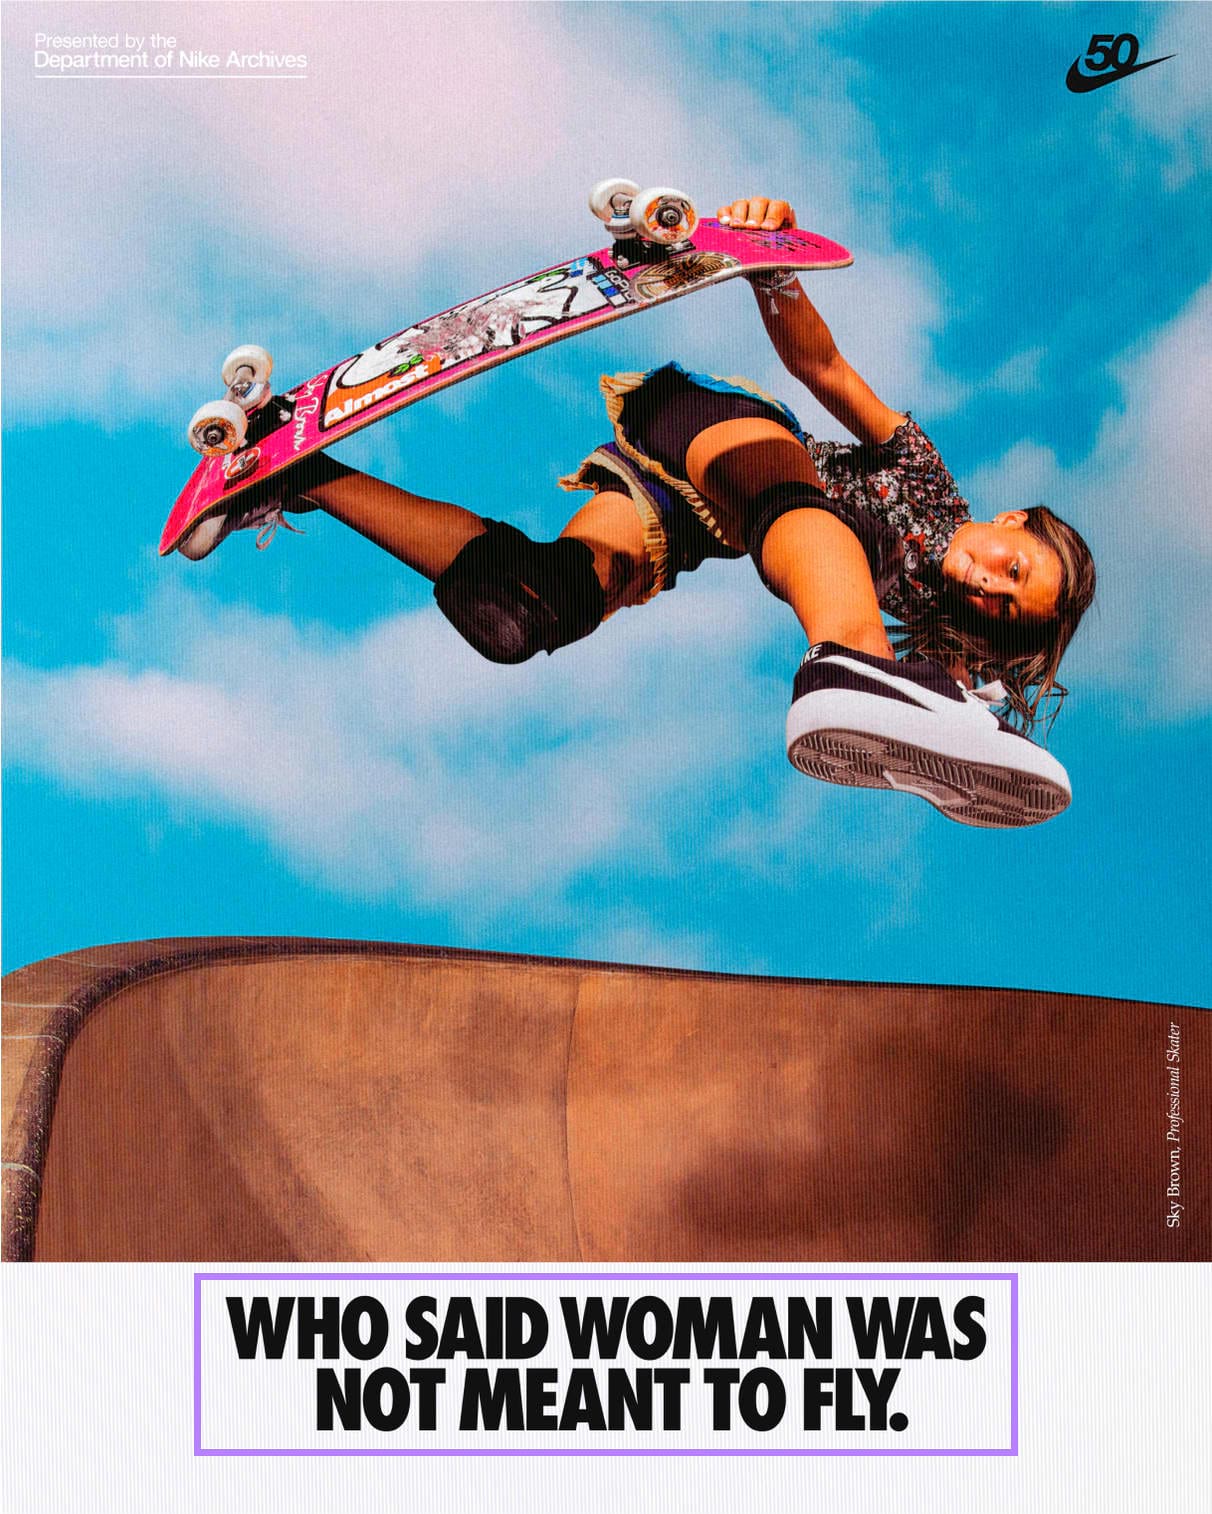 An ad from Nike campaign featuring a girl on a skate with "who said woman was not meant to fly." copy